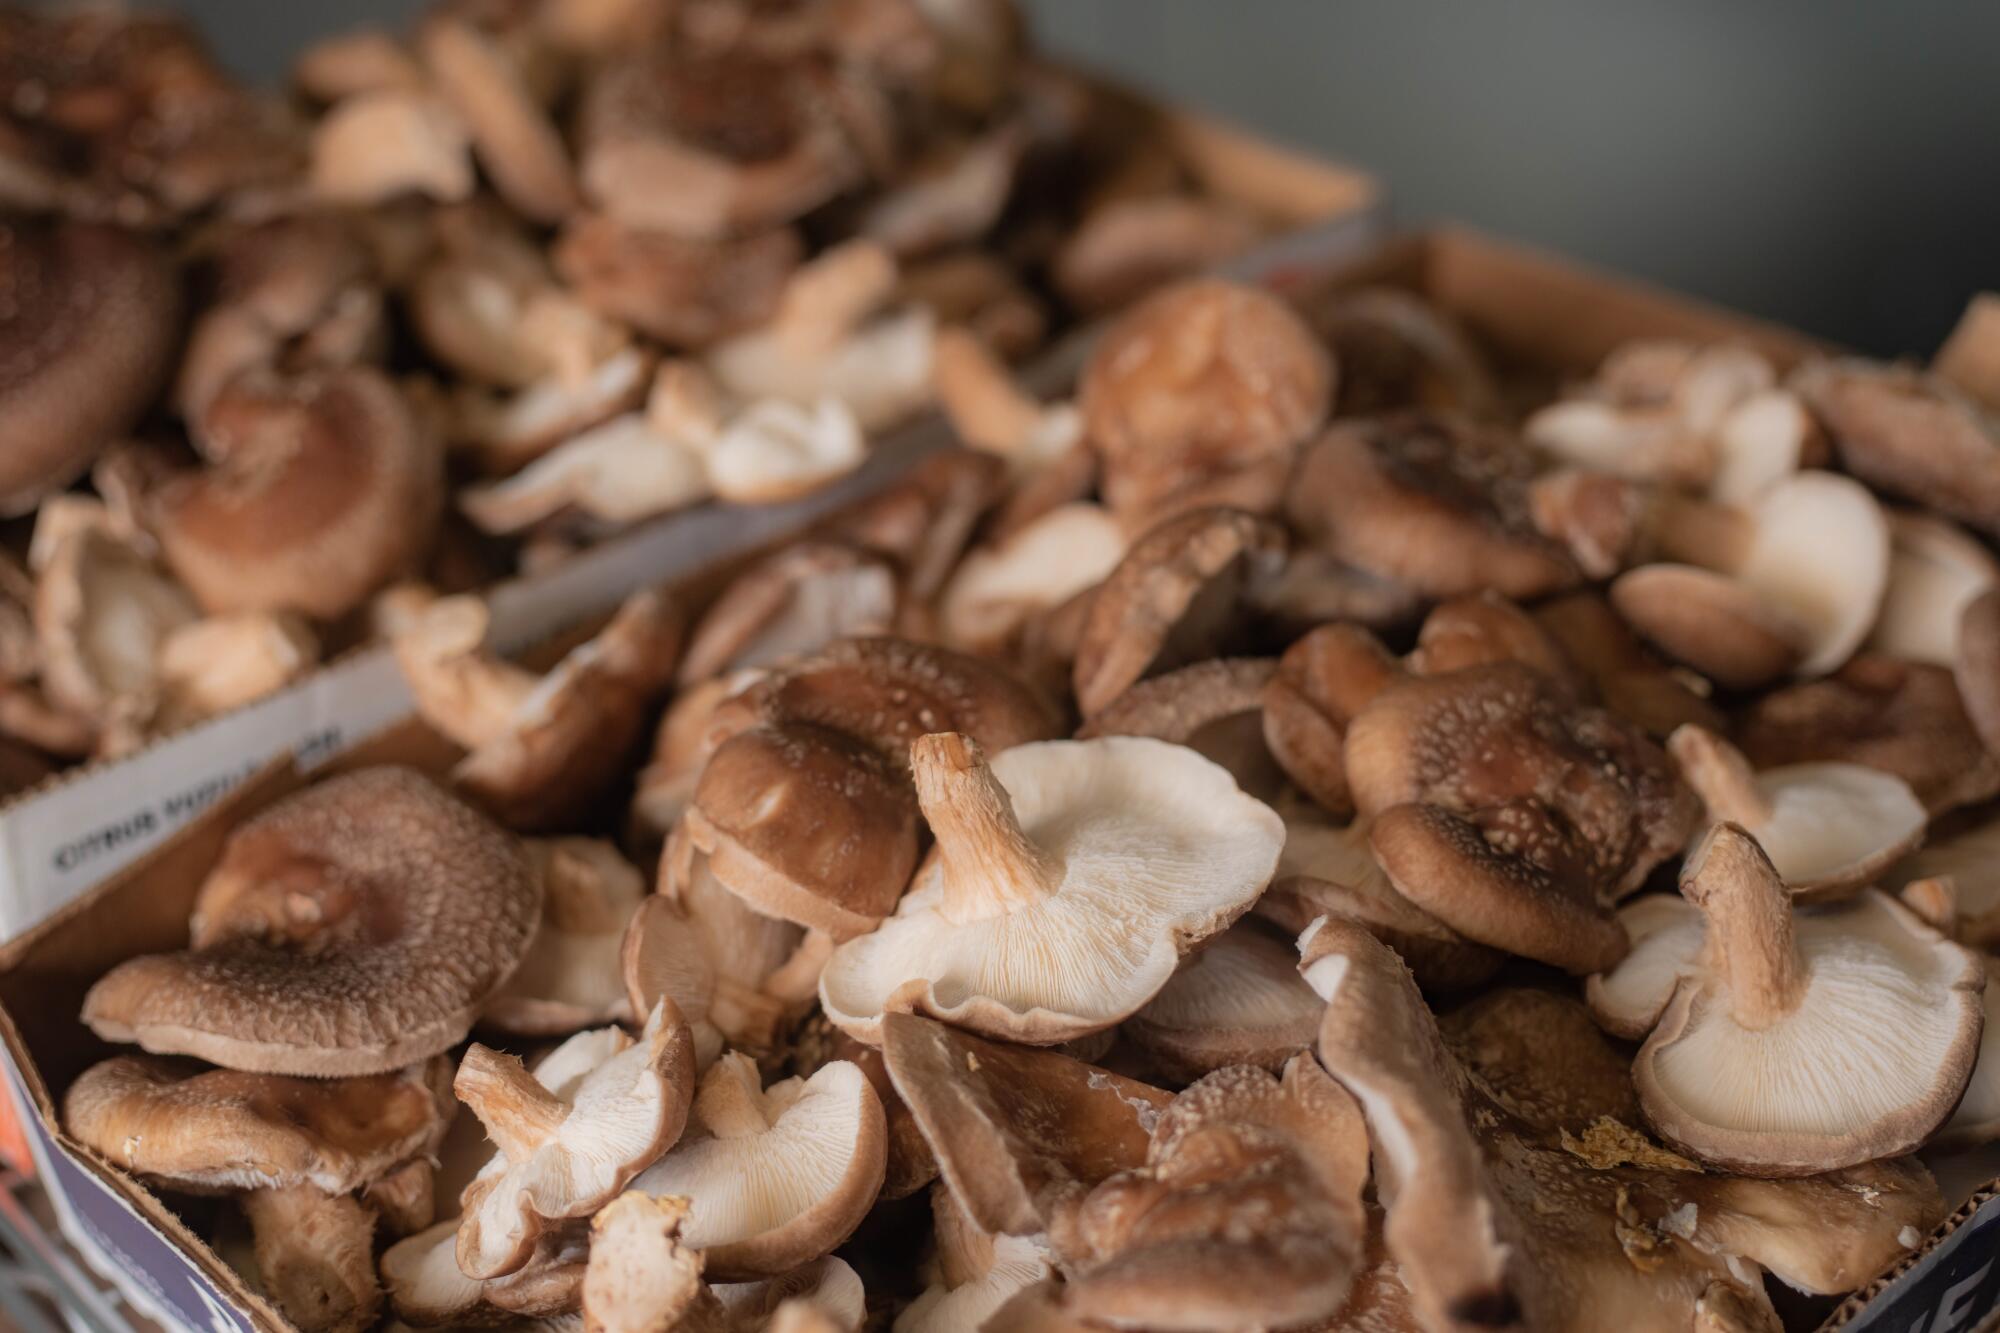 5 Easy Ways To Get The Most Out Of Shiitake Mushrooms - Honeymoon Farm